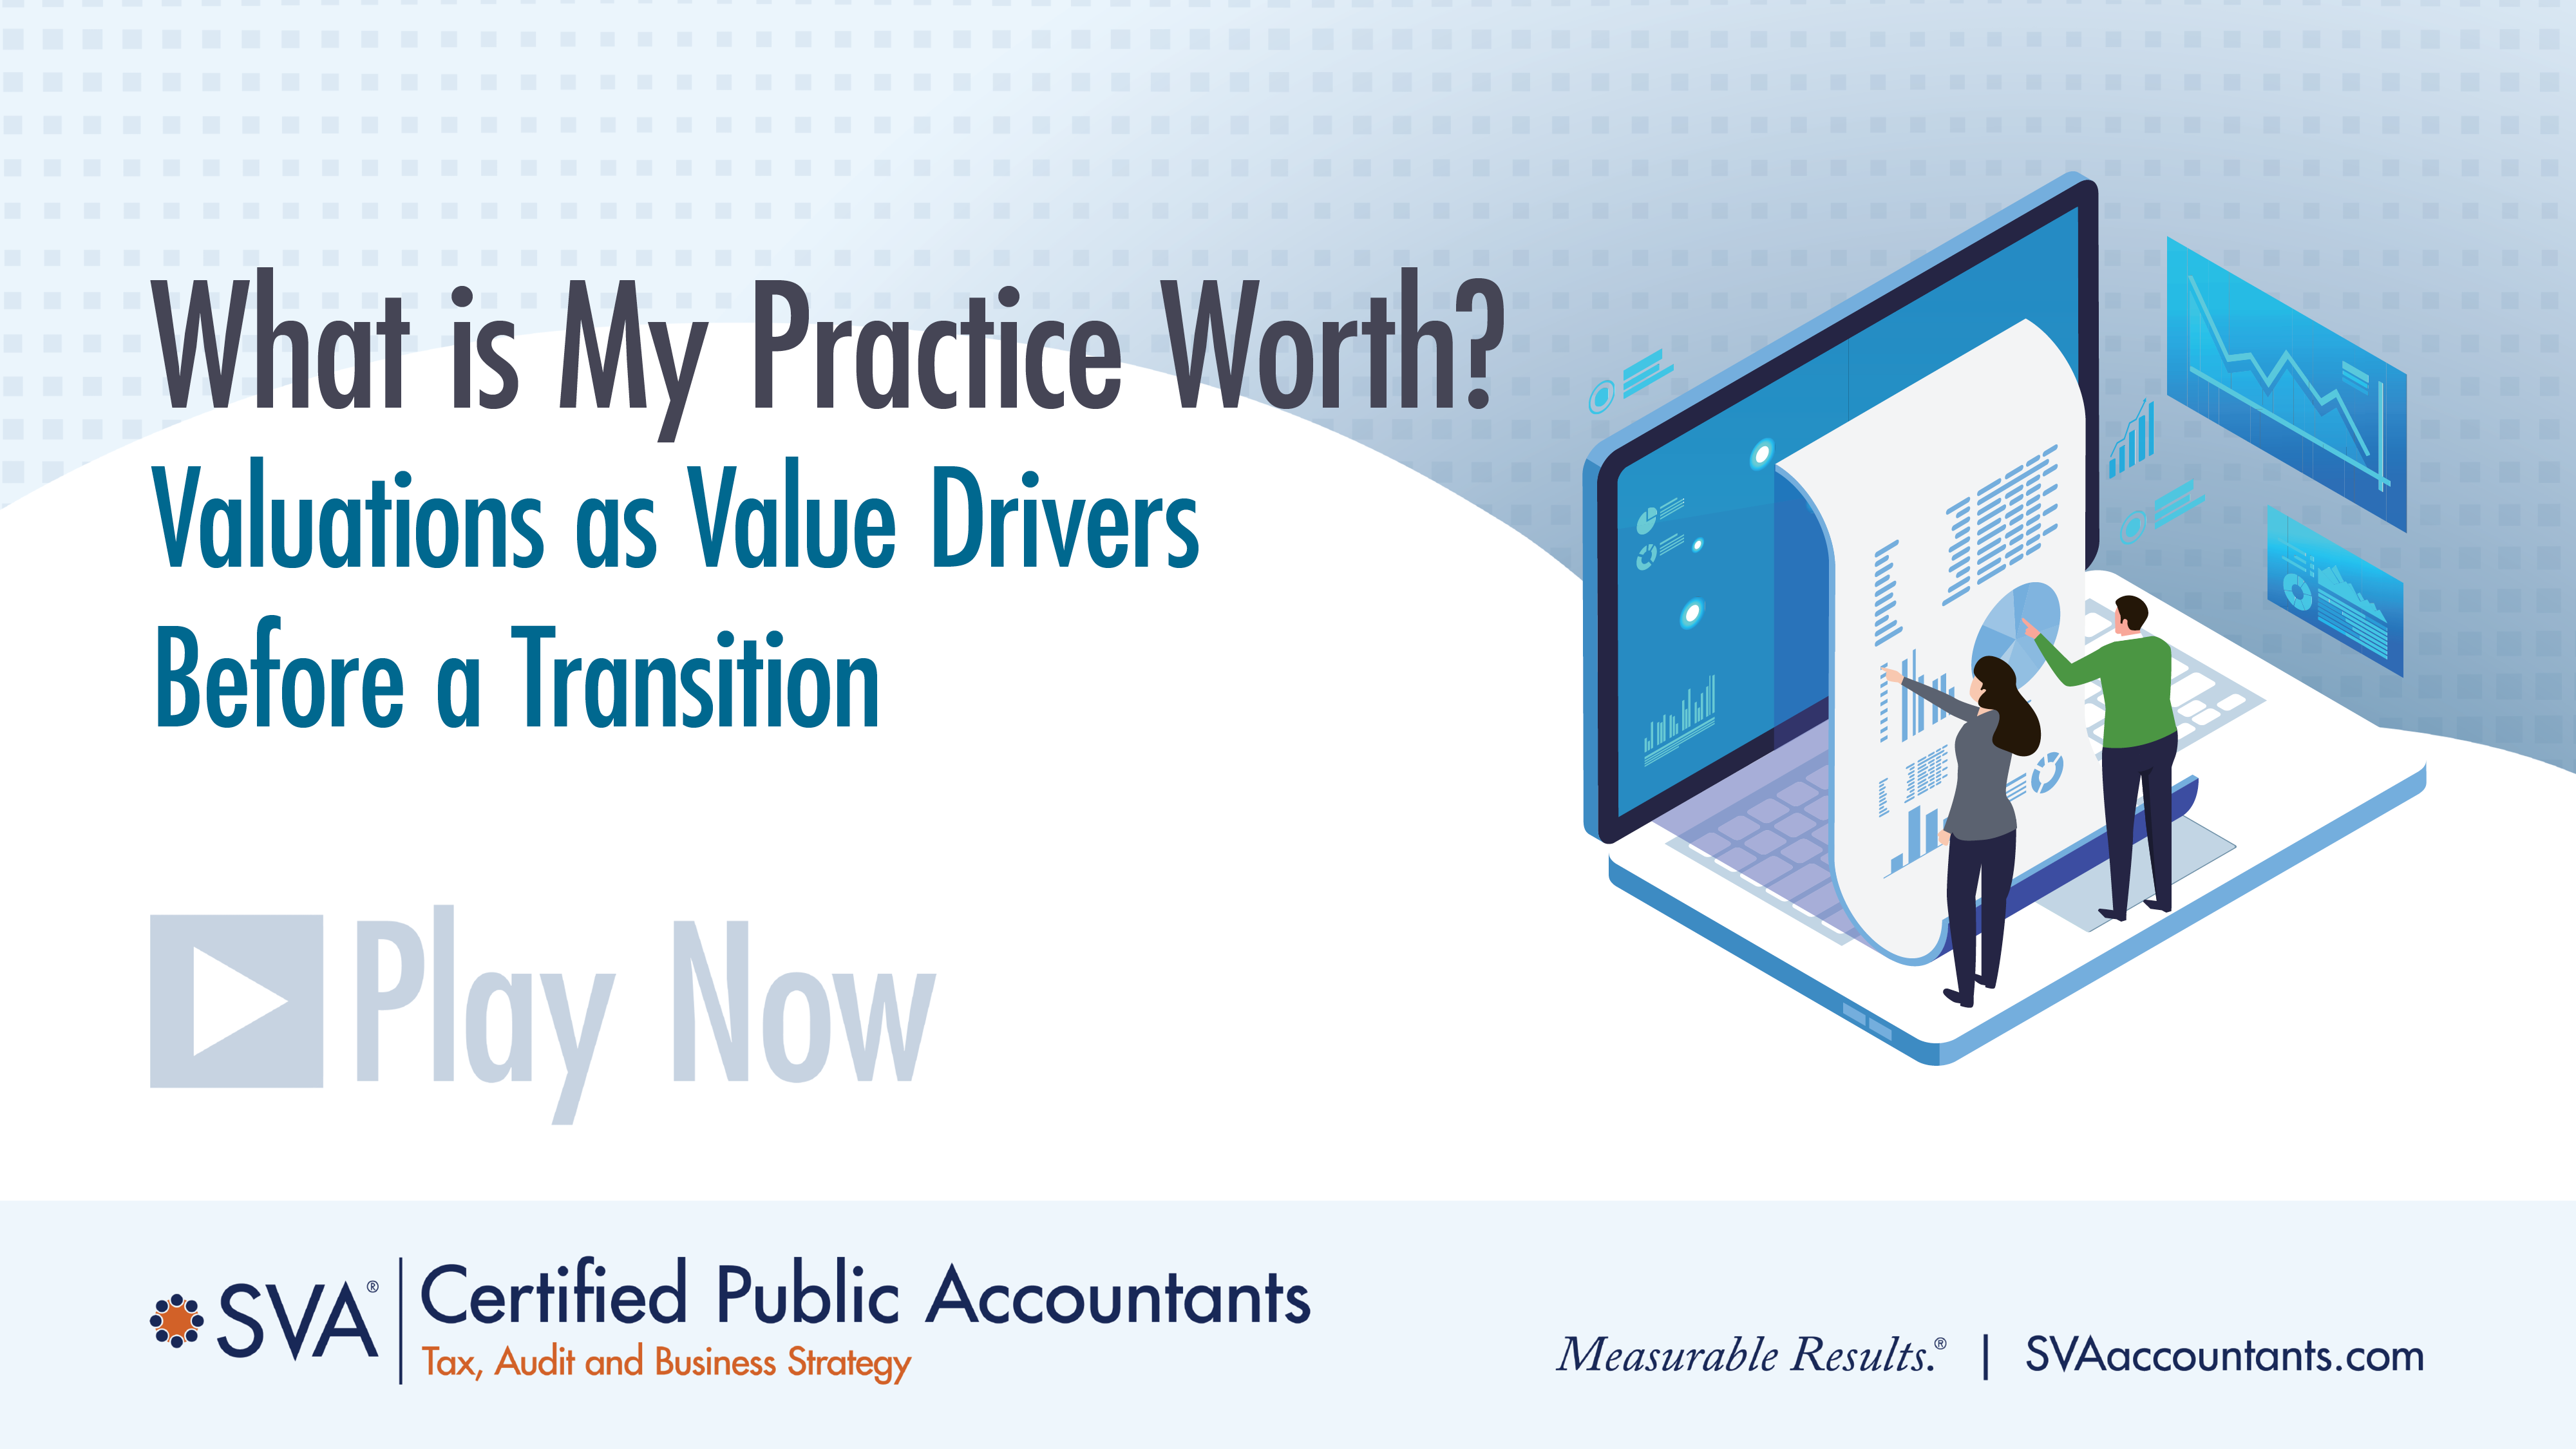 What is My Practice Worth? Valuations as Value Drivers Before a Transition